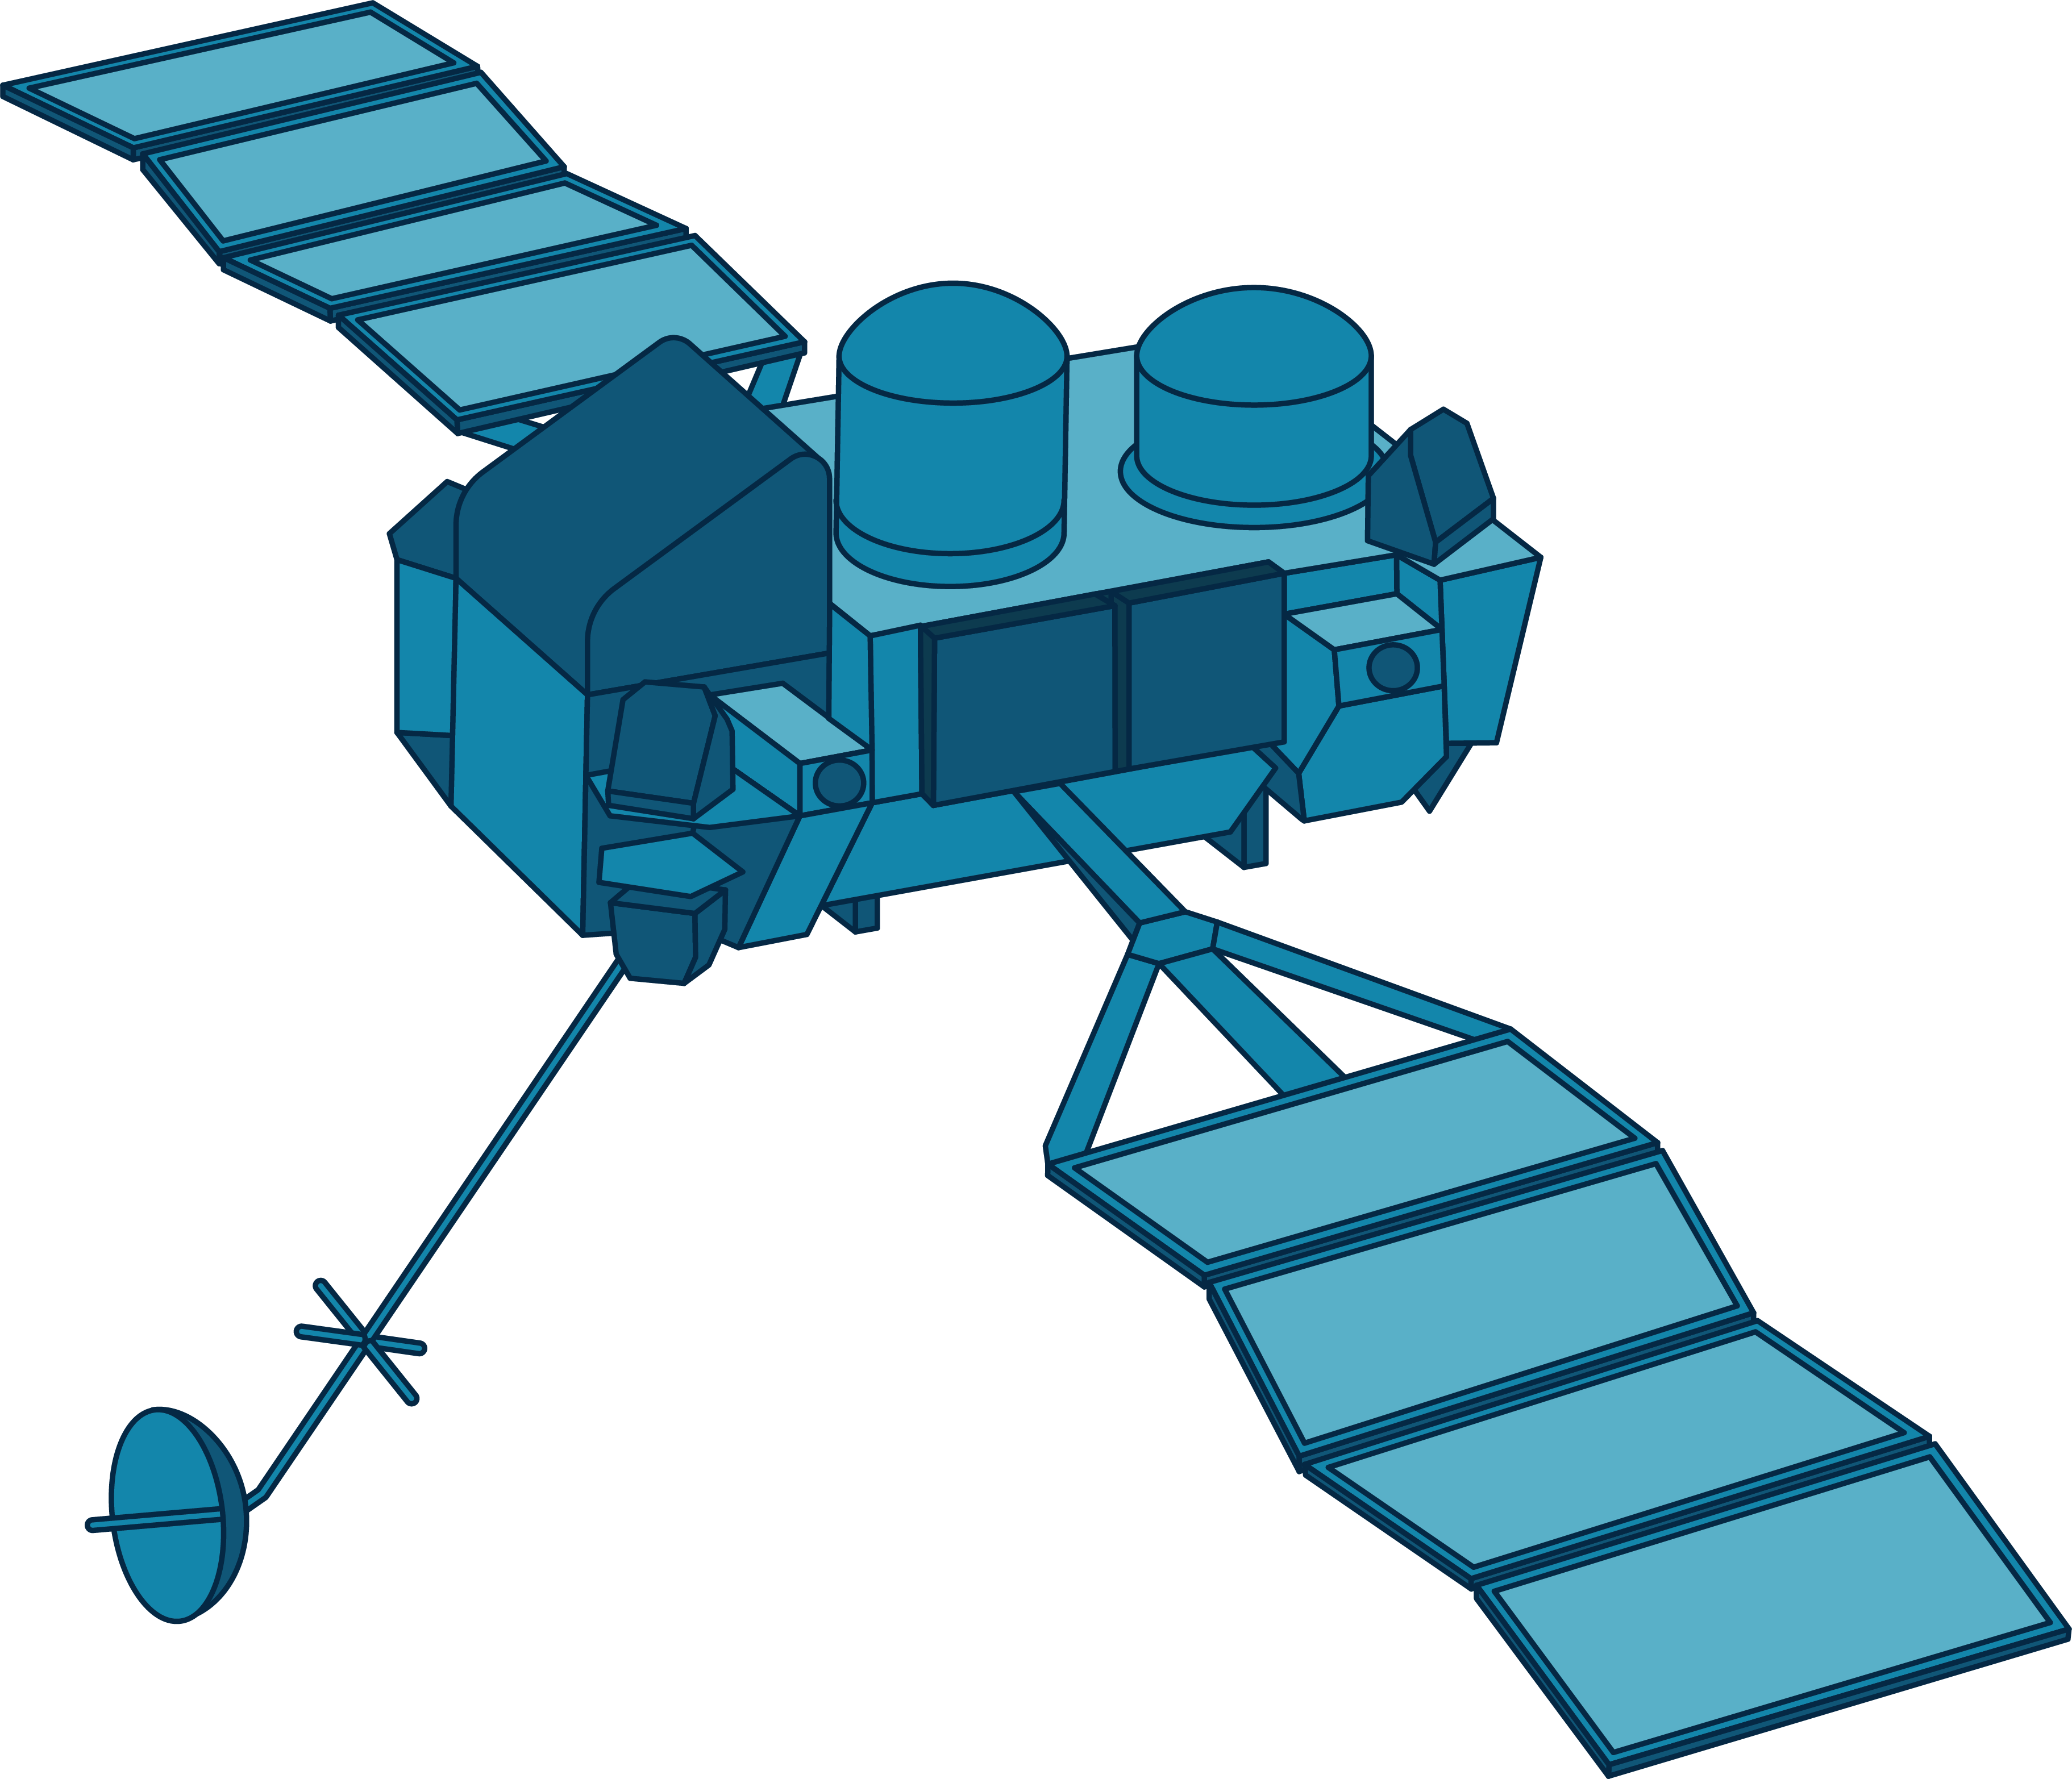 A graphic of CGRO is shown in light and dark shades of blue. The body of the spacecraft is rectangular, topped with two circular objects. Solar panels extend to either side, and a long pole with a small satellite dish at the end extends from the front end of the spacecraft.